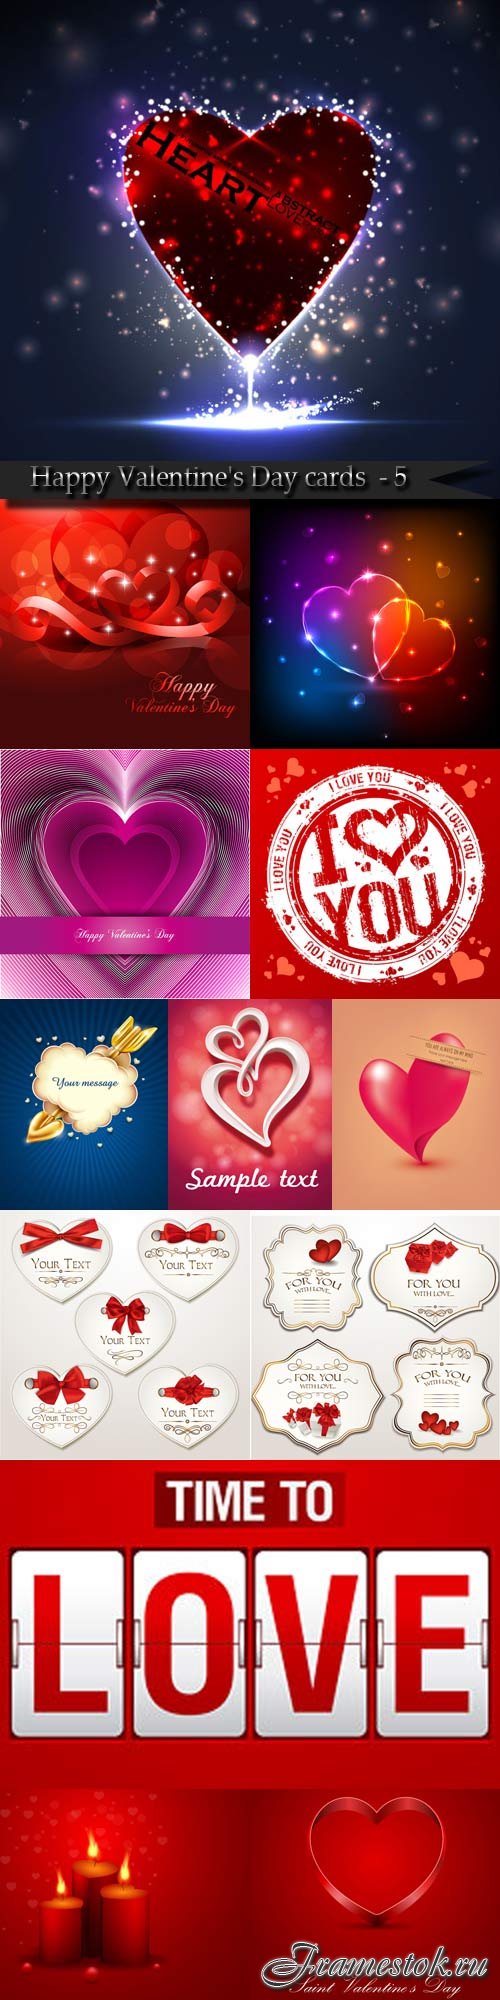 Happy Valentine's Day cards and backgrounds - 5